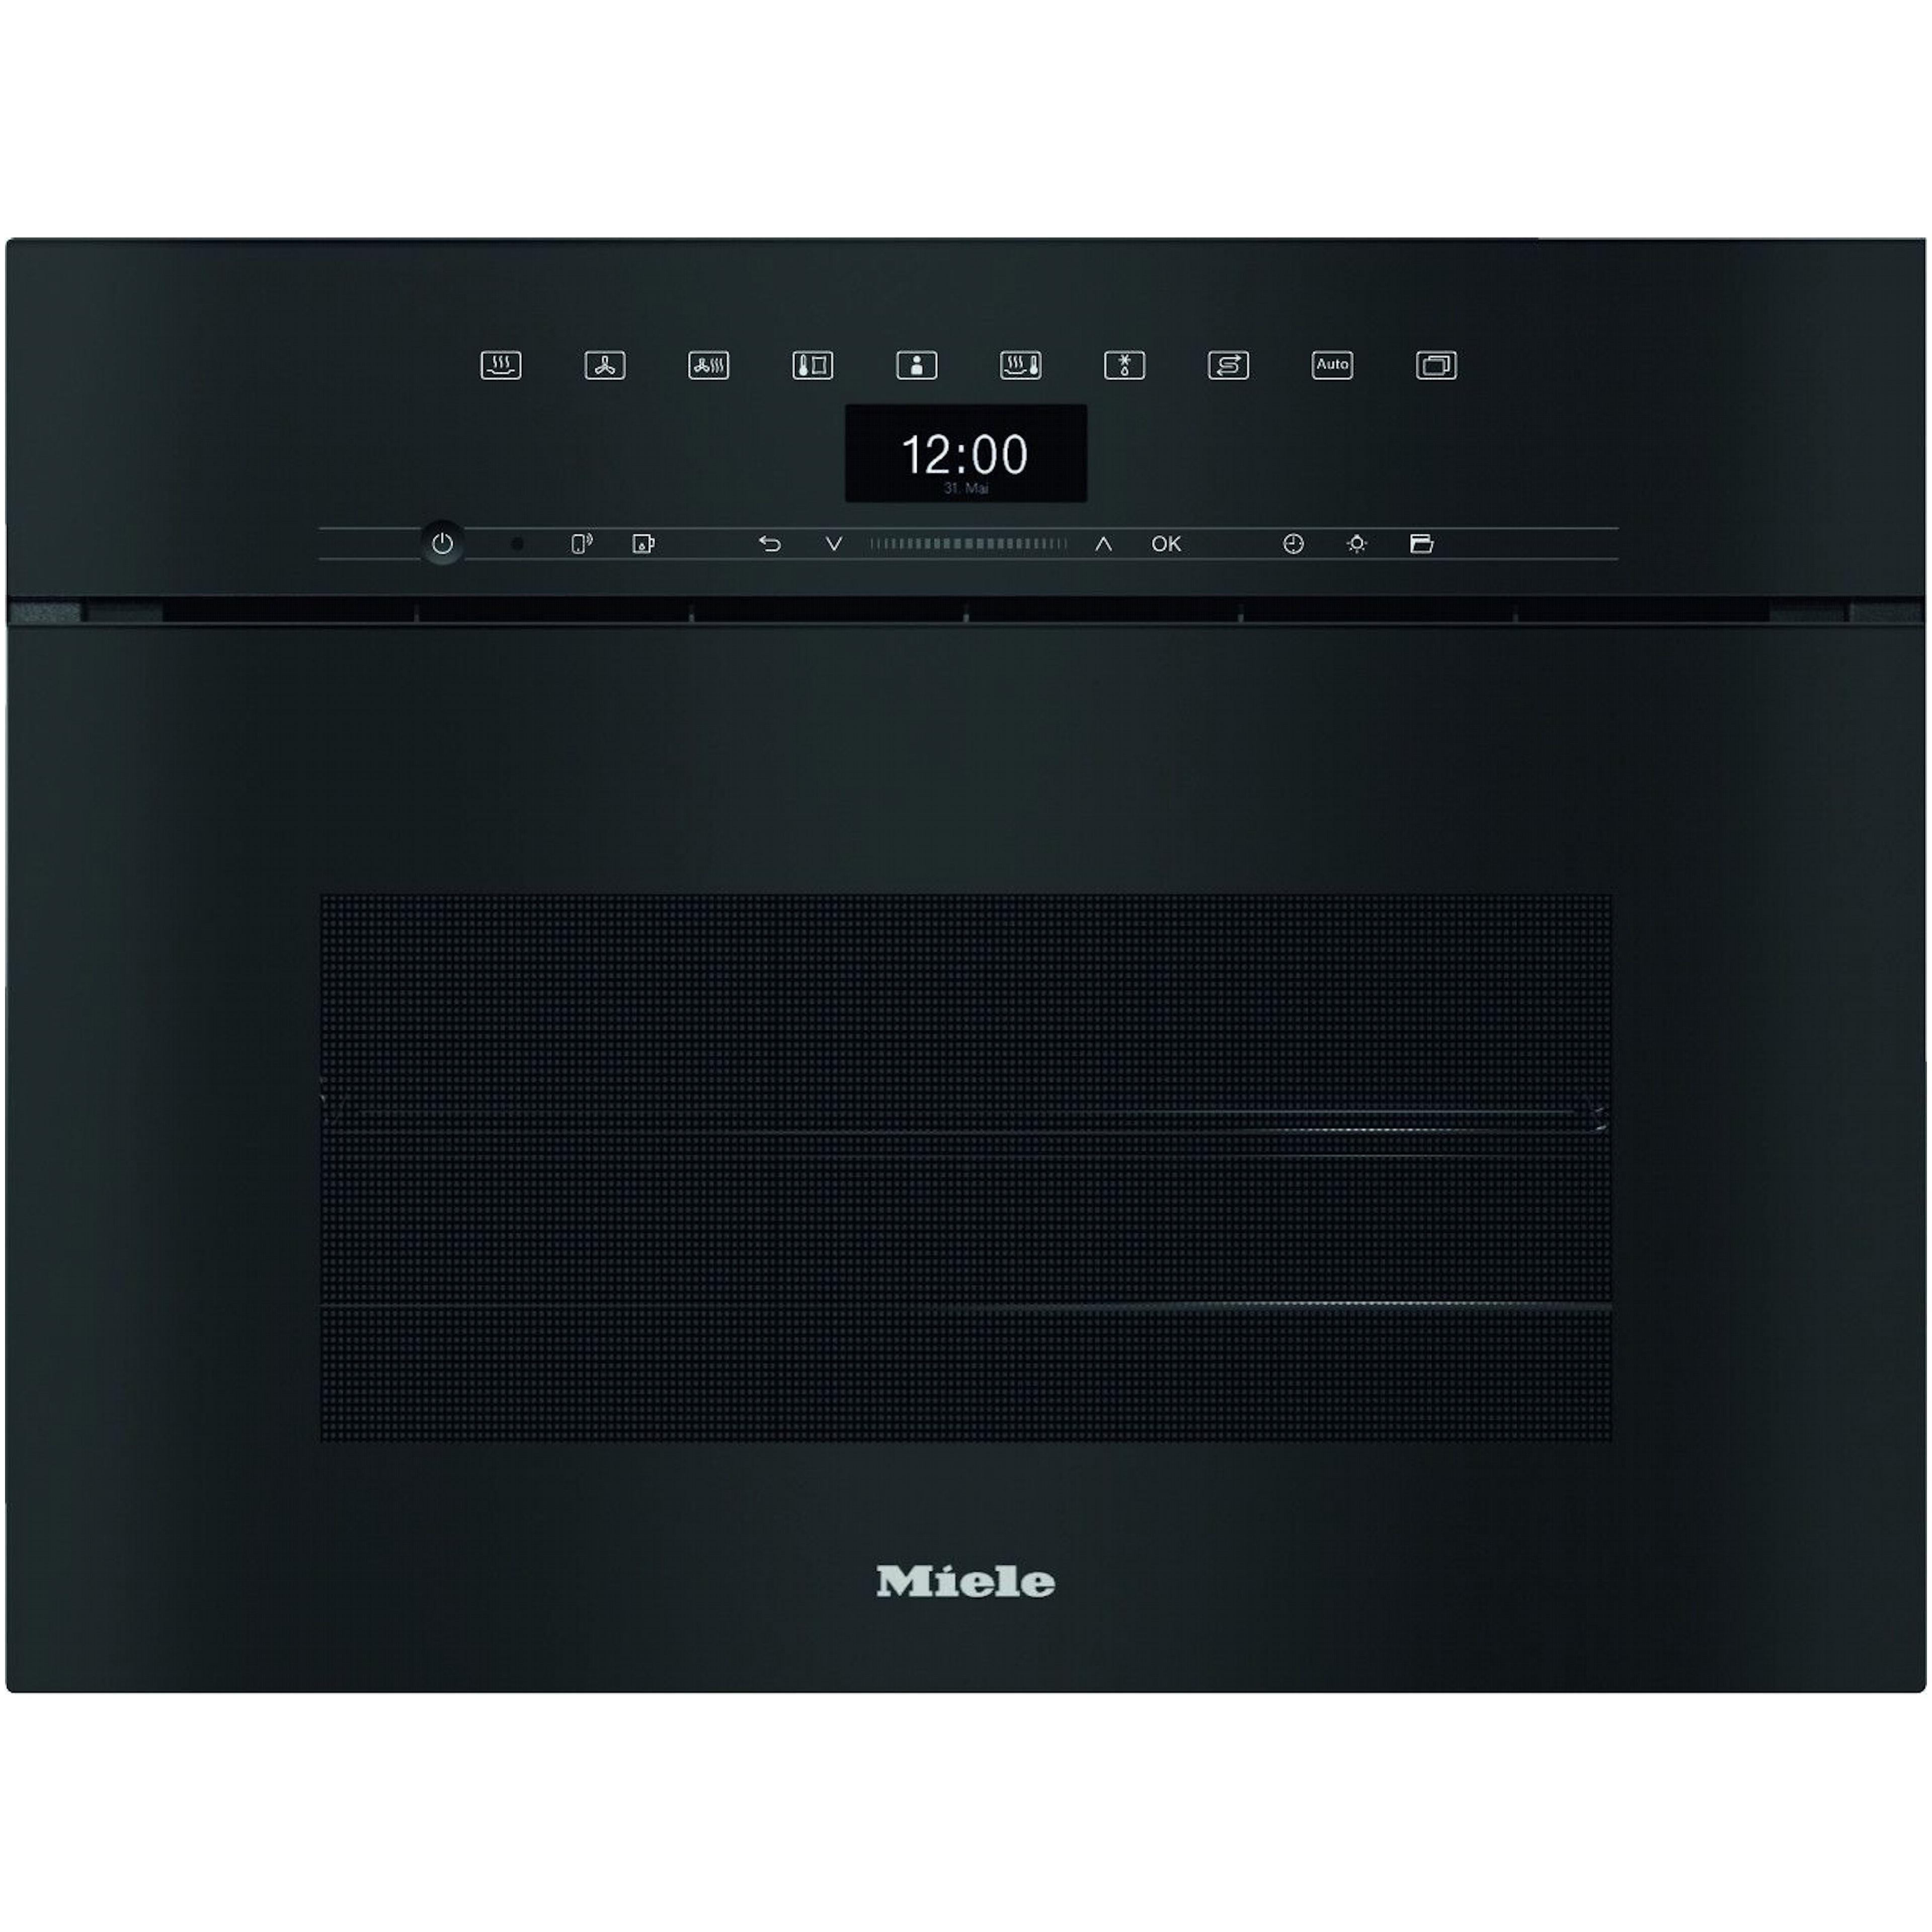 Miele DGC7445HCXPROOBSW